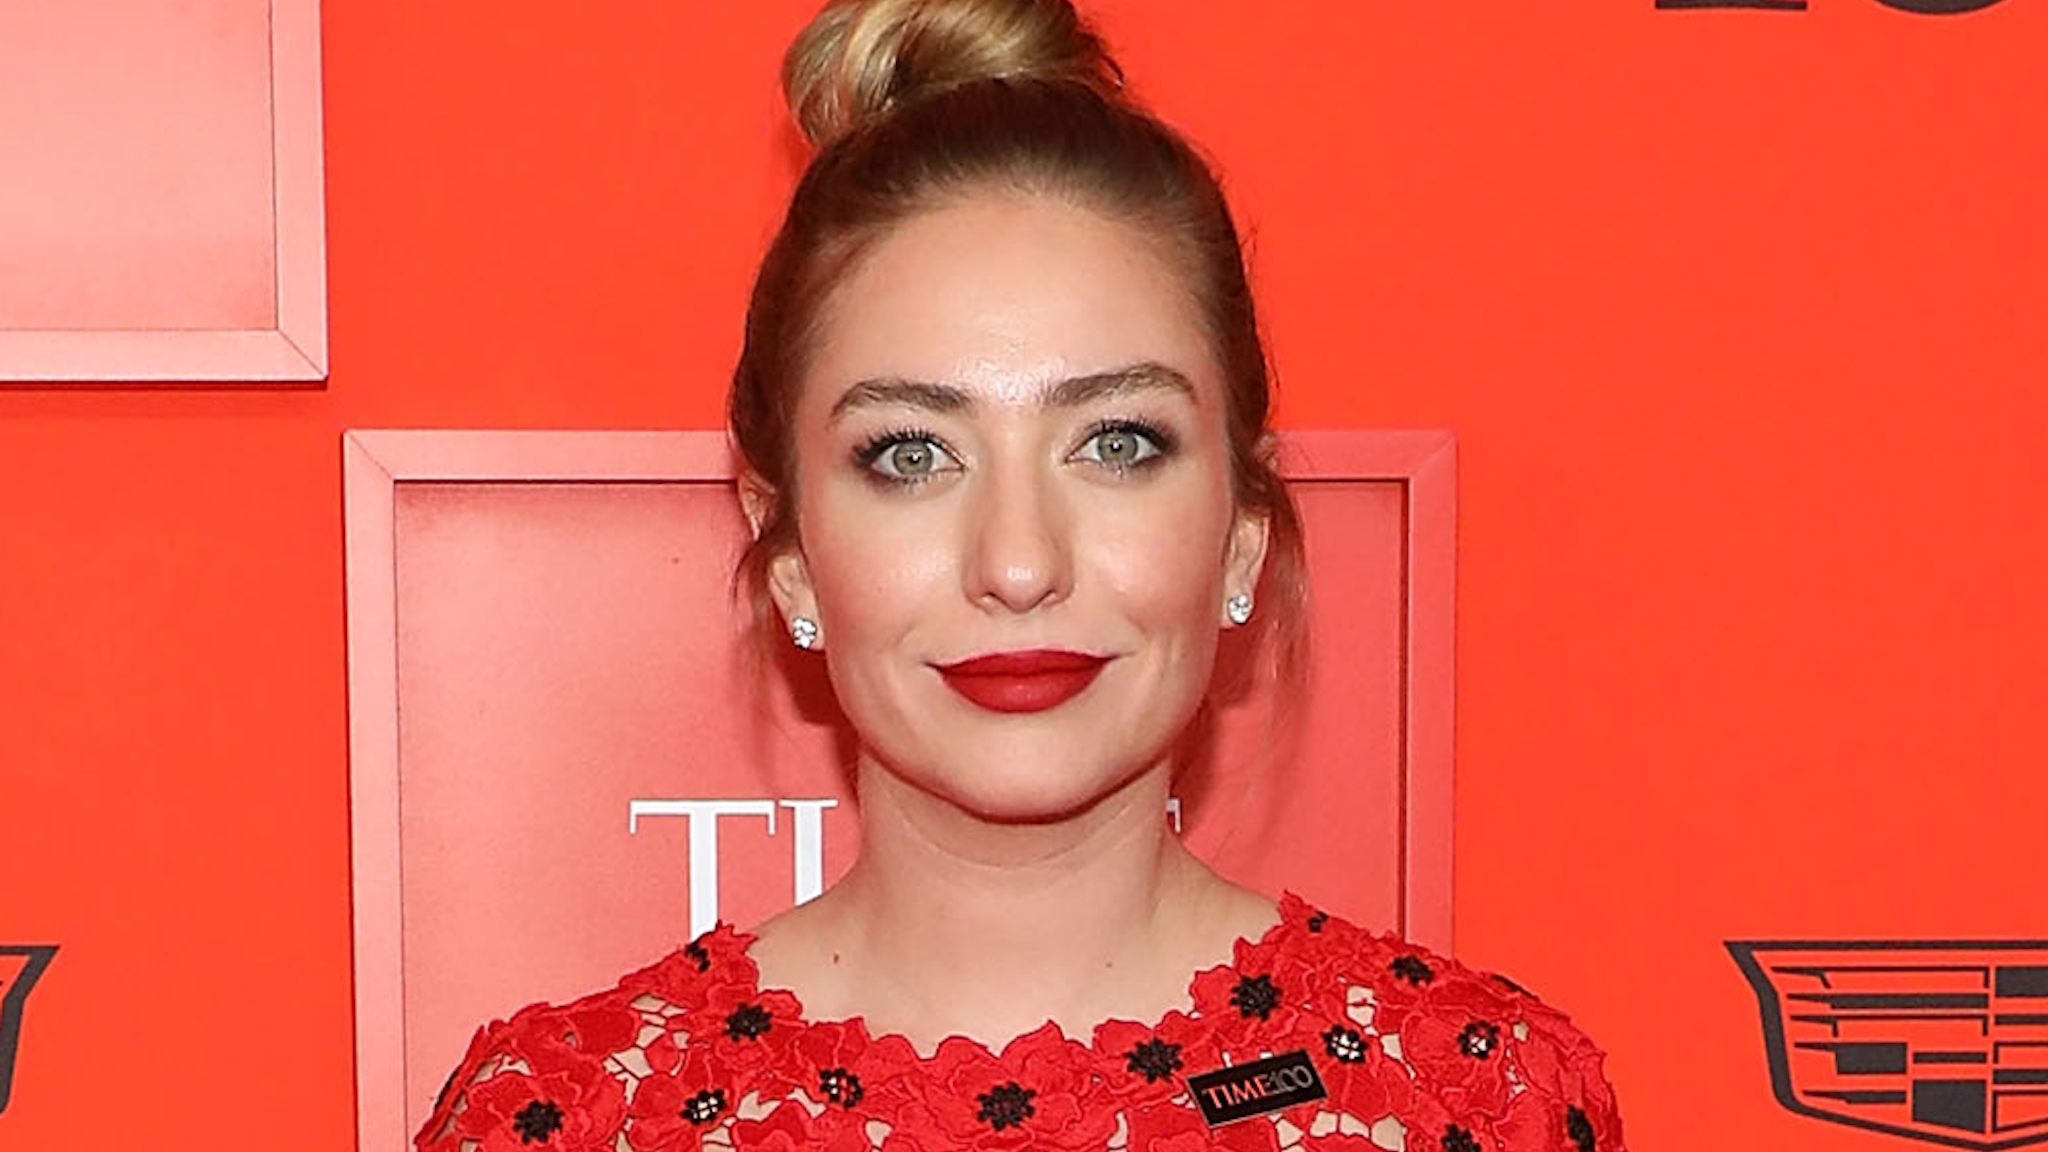 NEW YORK, NY - APRIL 23: Whitney Wolfe attends the 2019 Time 100 Gala at Frederick P. Rose Hall, Jazz at Lincoln Center on April 23, 2019 in New York City.